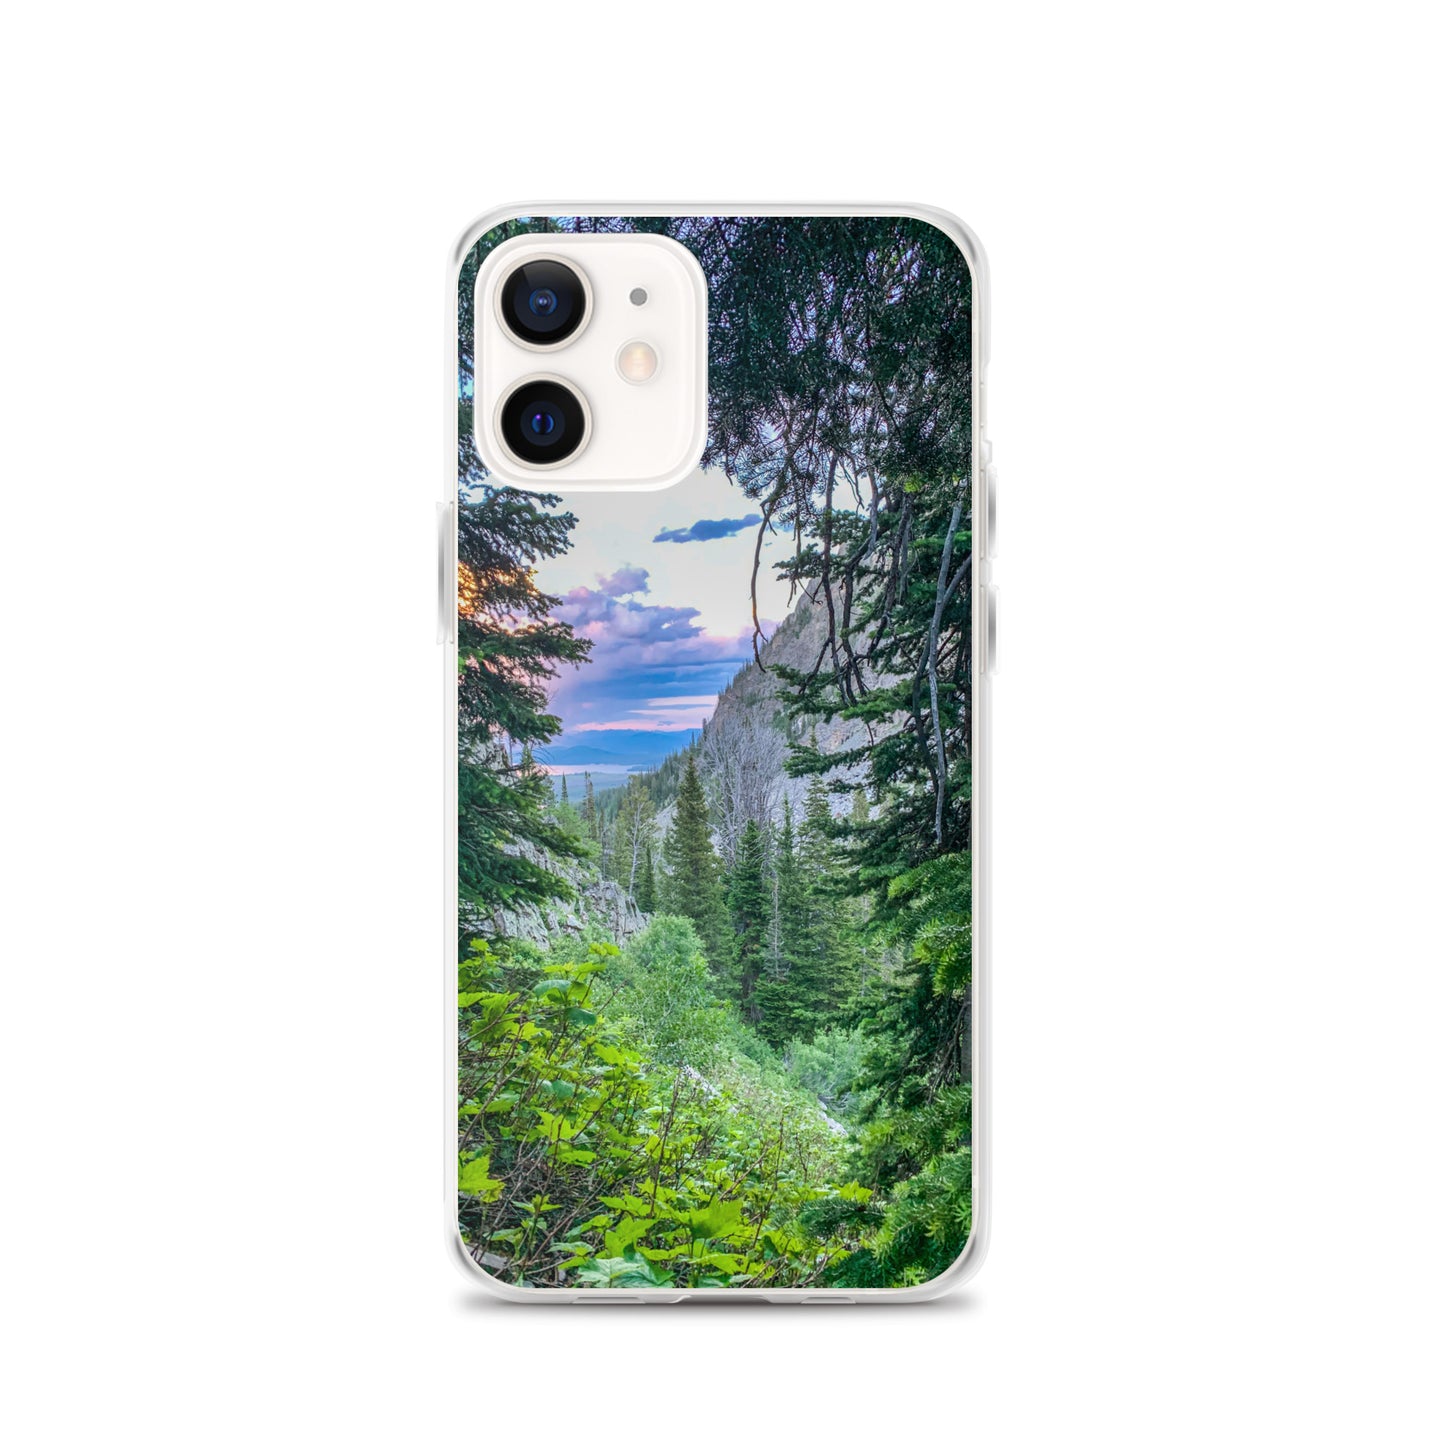 Through the Pines (iPhone Case) - Comfortable Culture - iPhone 12 - Mobile Phone Cases - Comfortable Culture